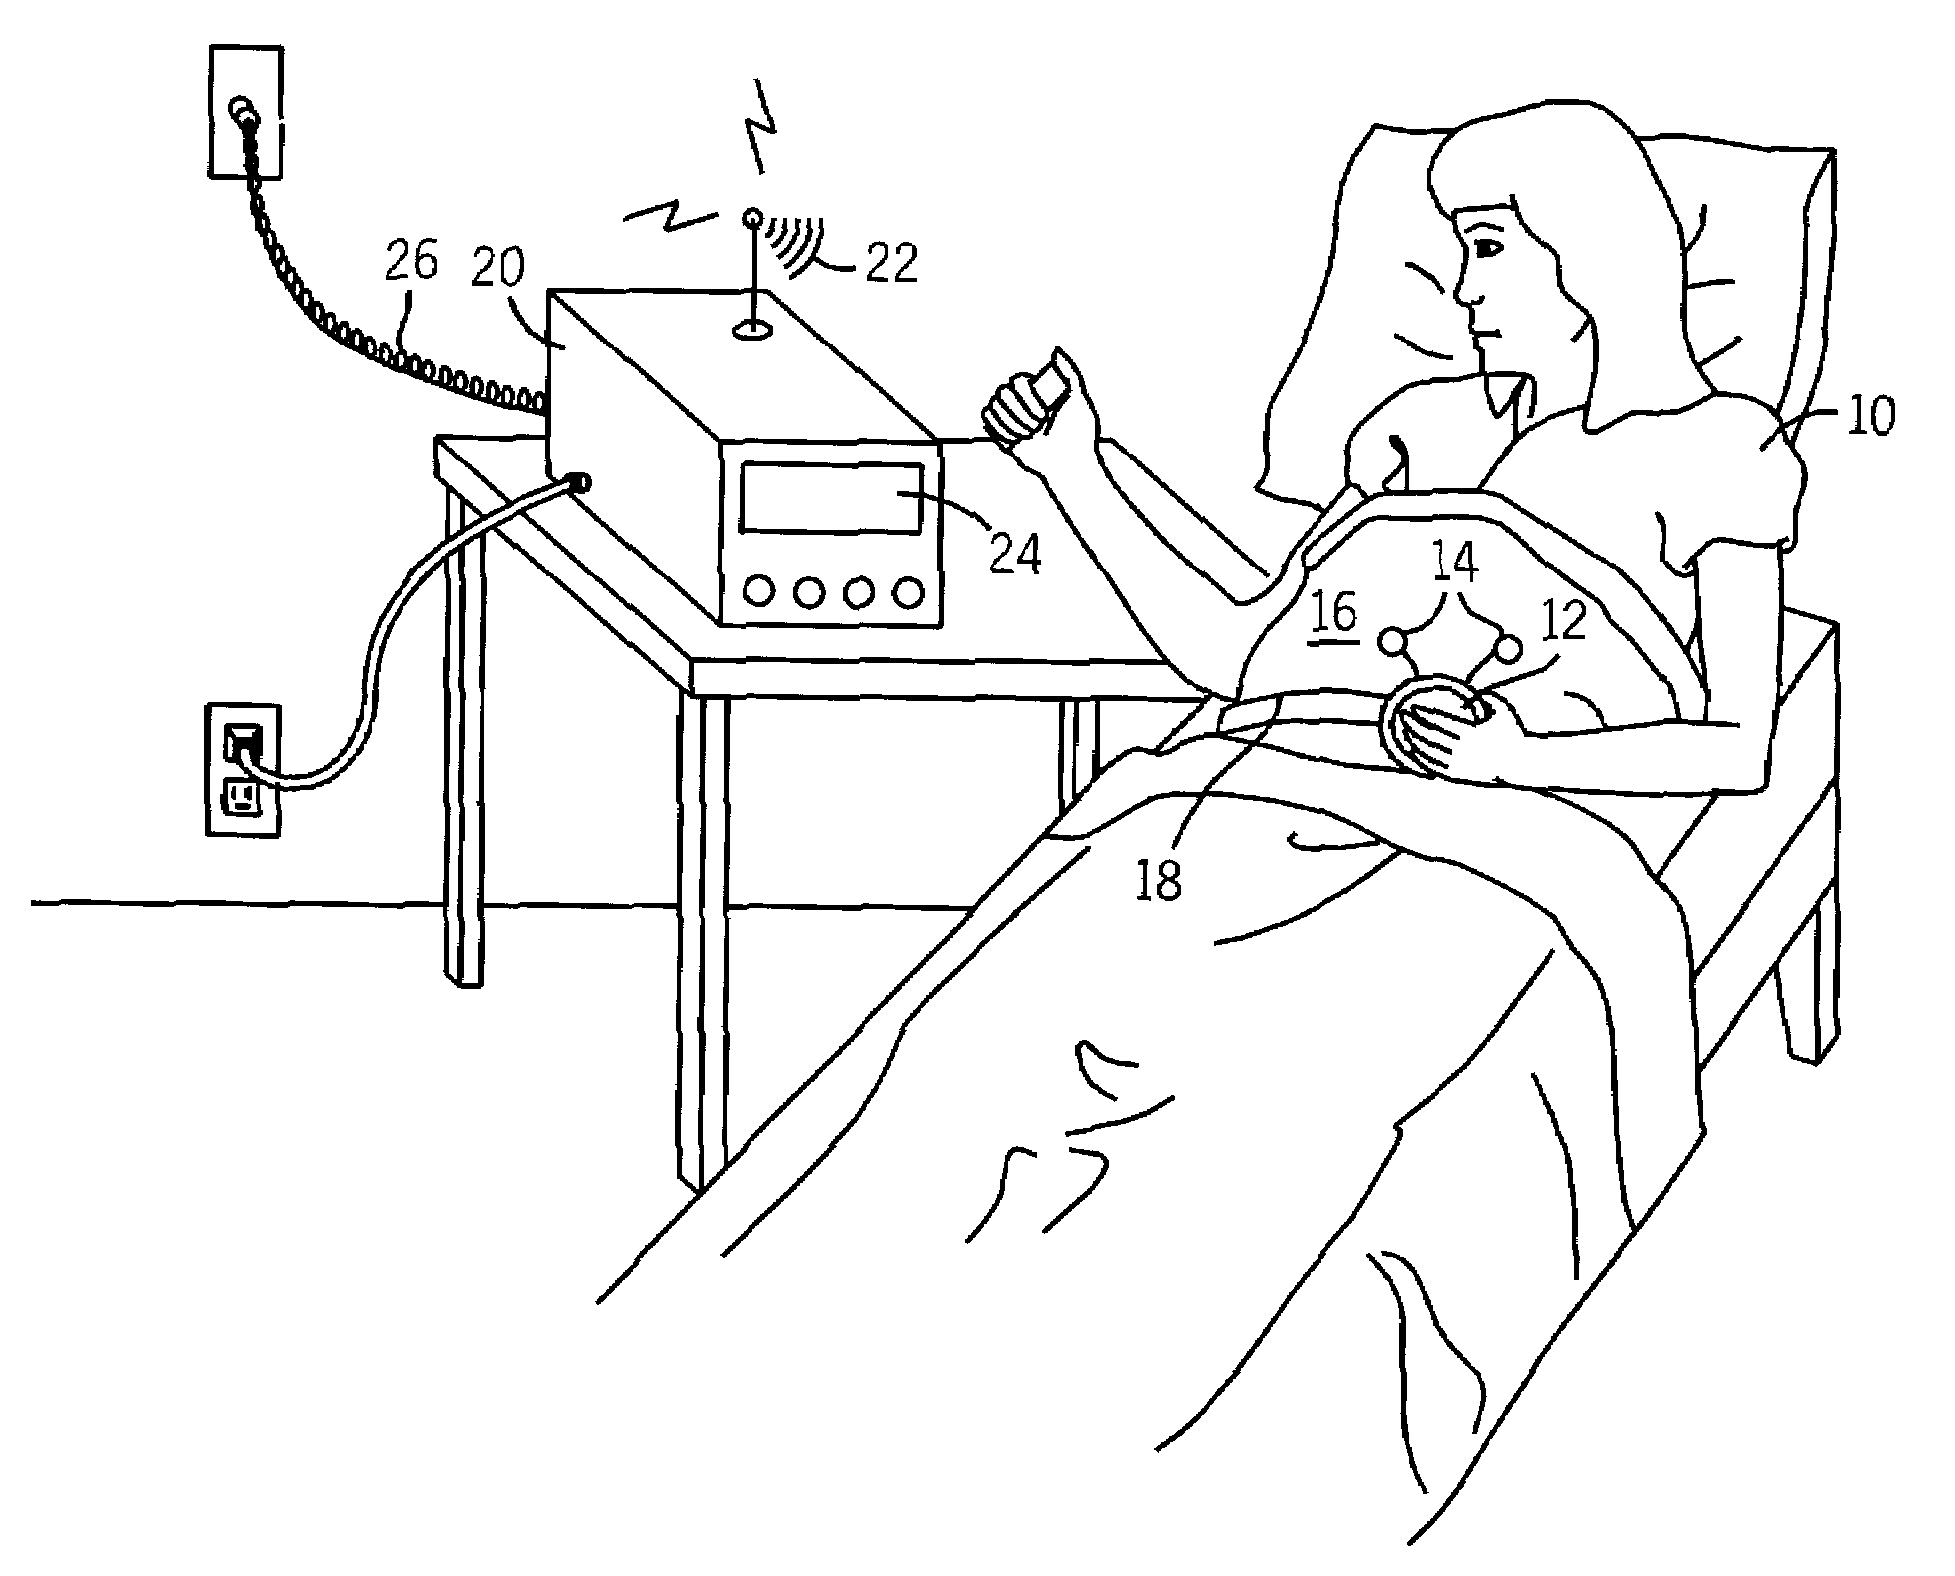 A combined uterine activity and fetal heart rate monitoring device